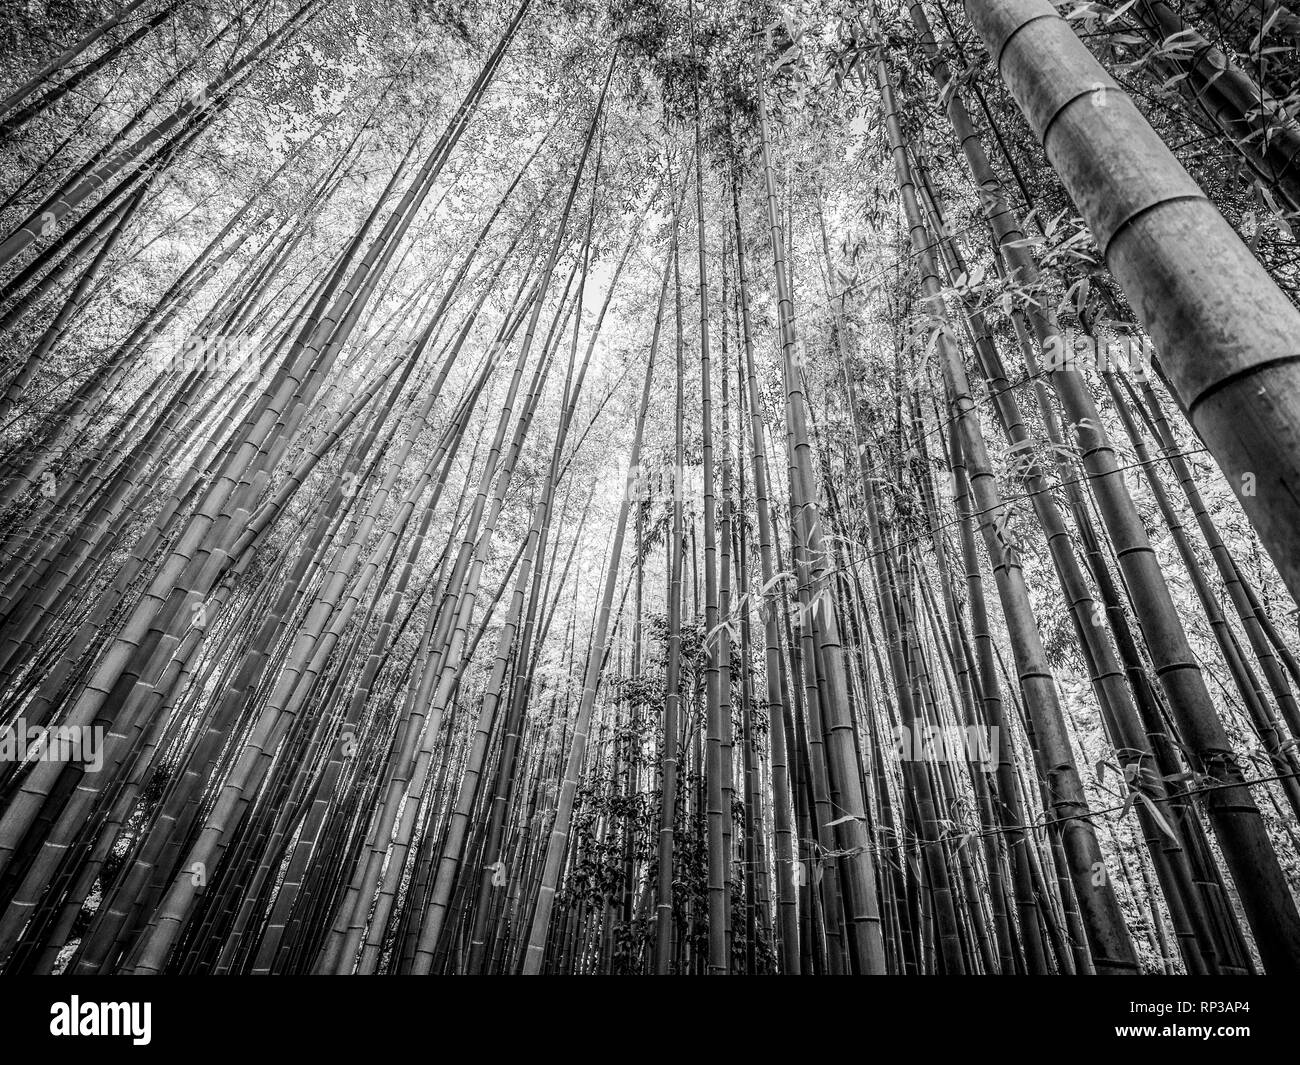 Tall bamboo trees in an japanese forest Black and White Stock Photos ...